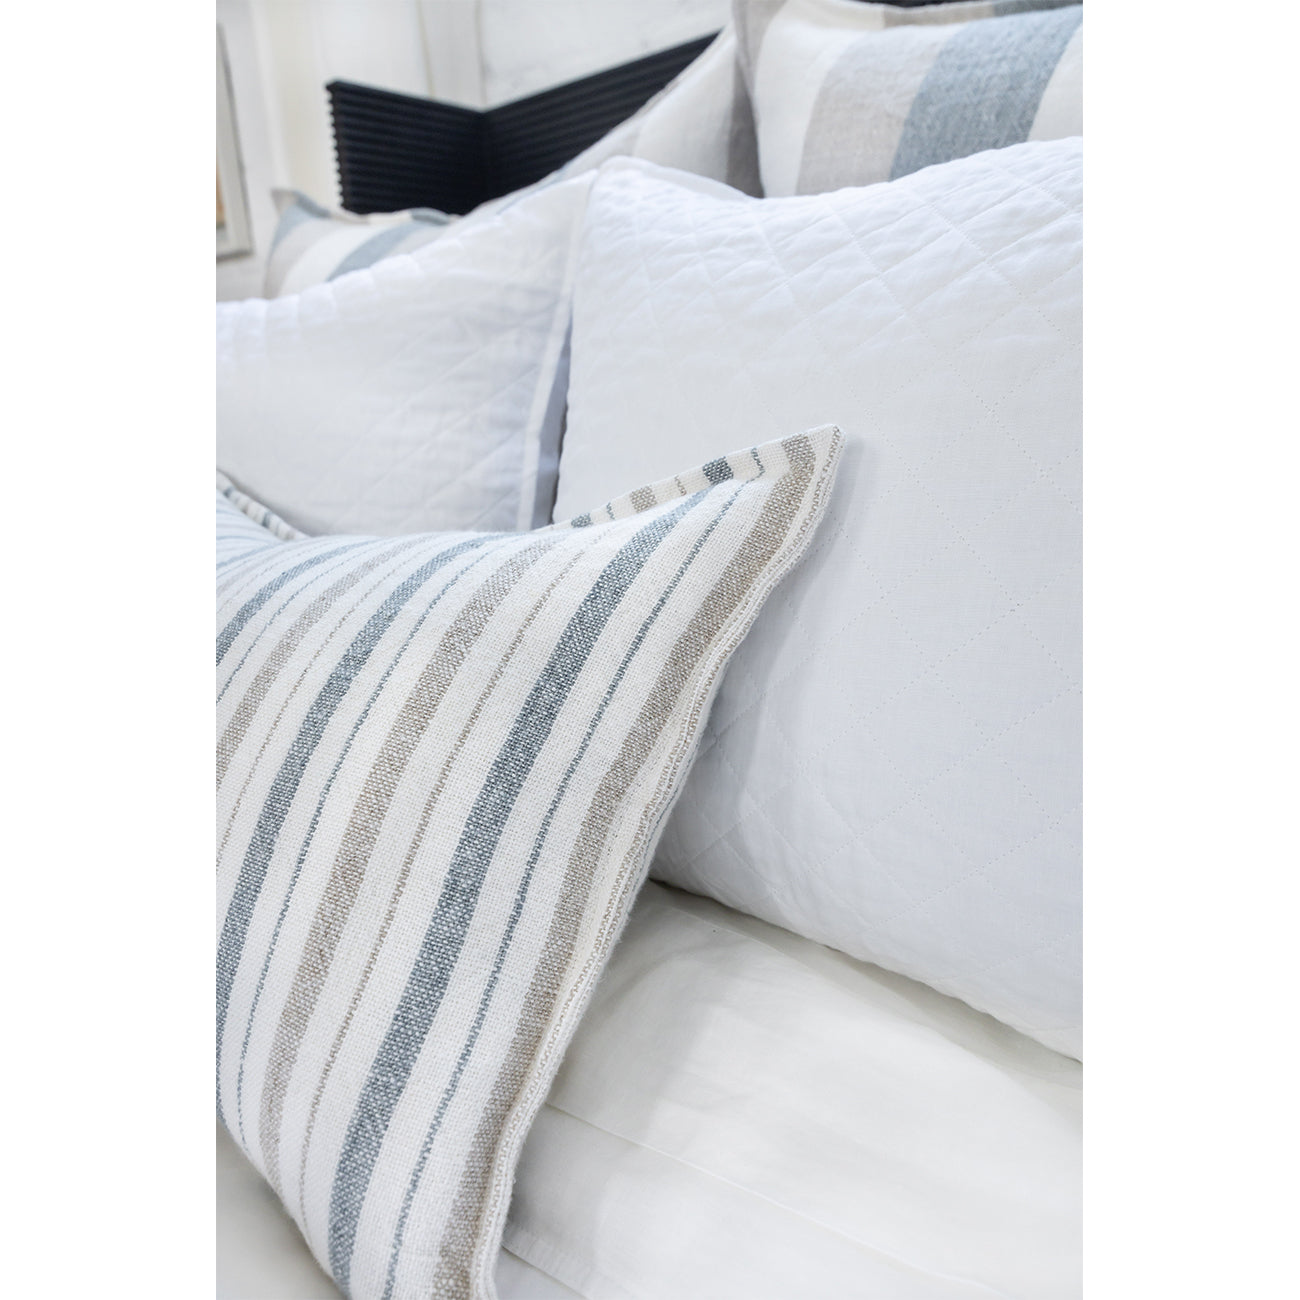 Naples Body Pillow with insert - pom pom at home